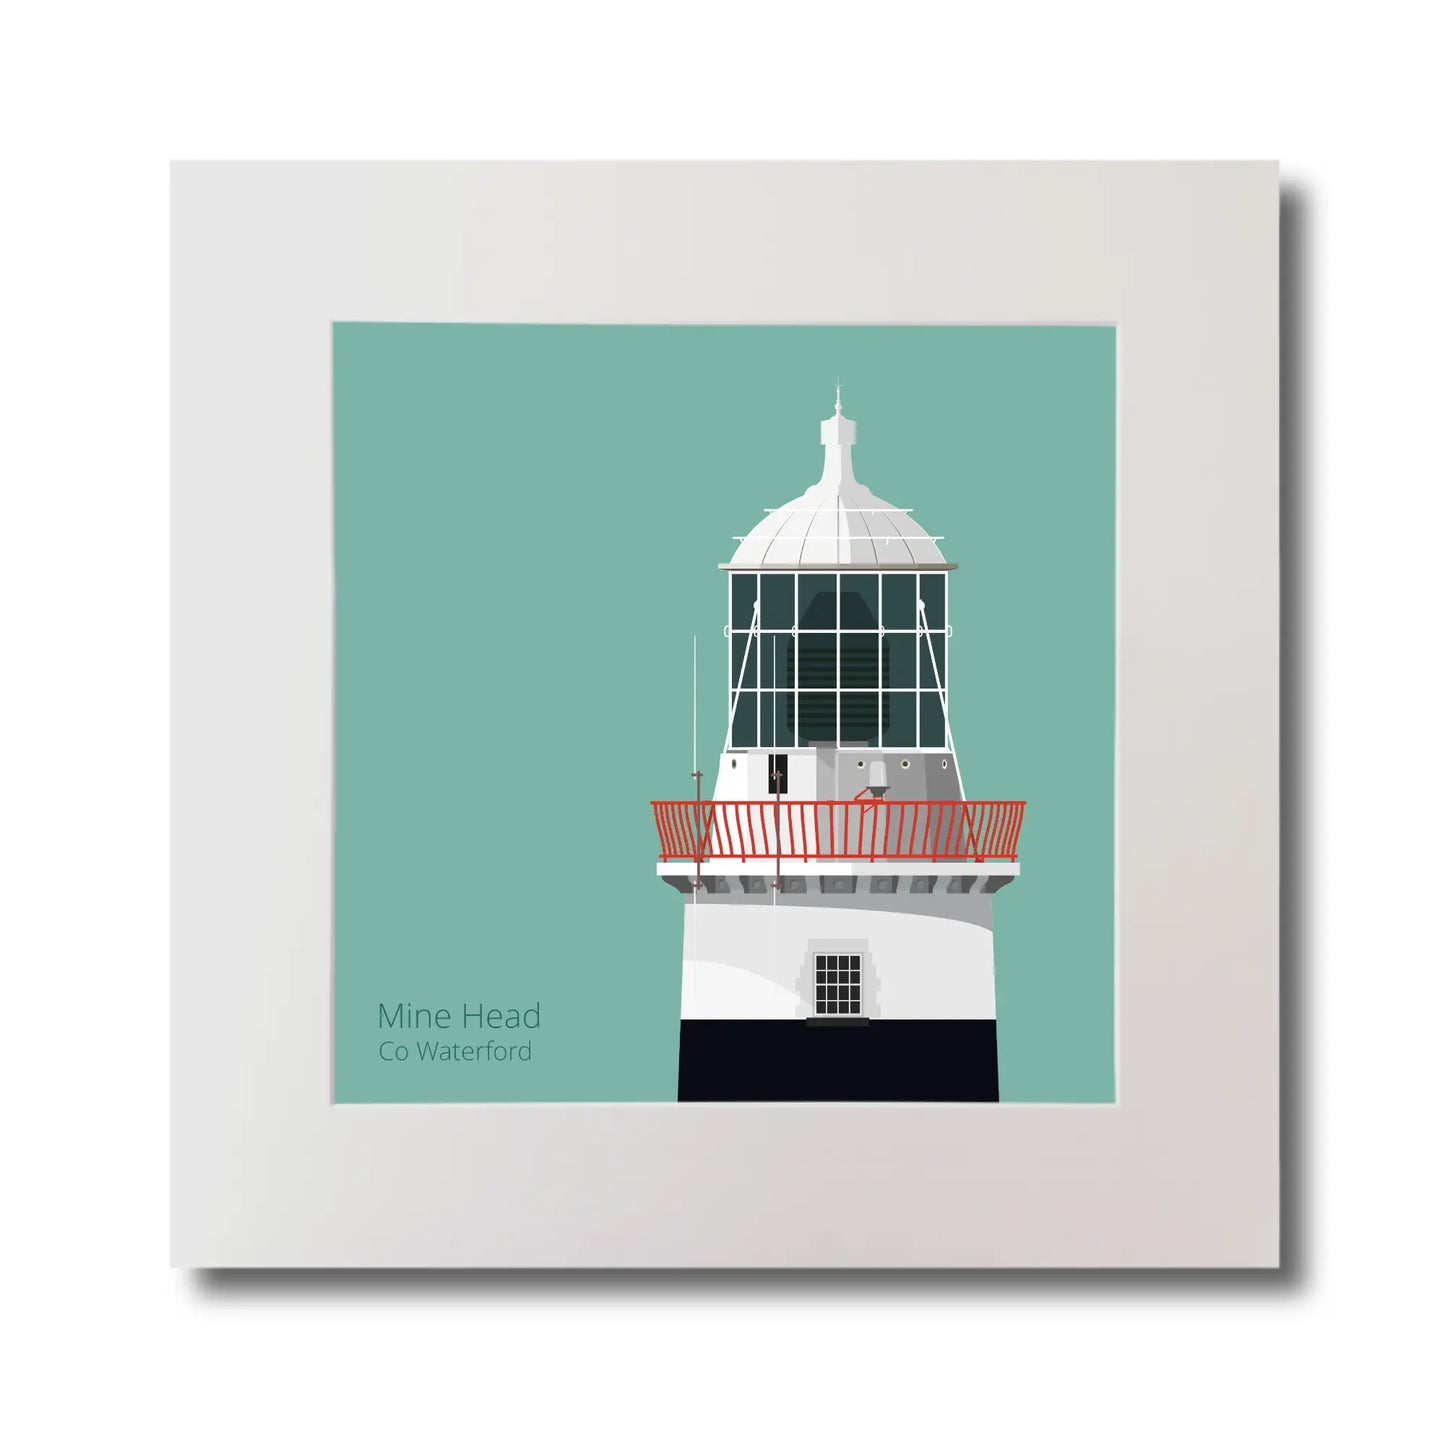 Illustration of Mine Head lighthouse on an ocean green background, mounted and measuring 30x30cm.